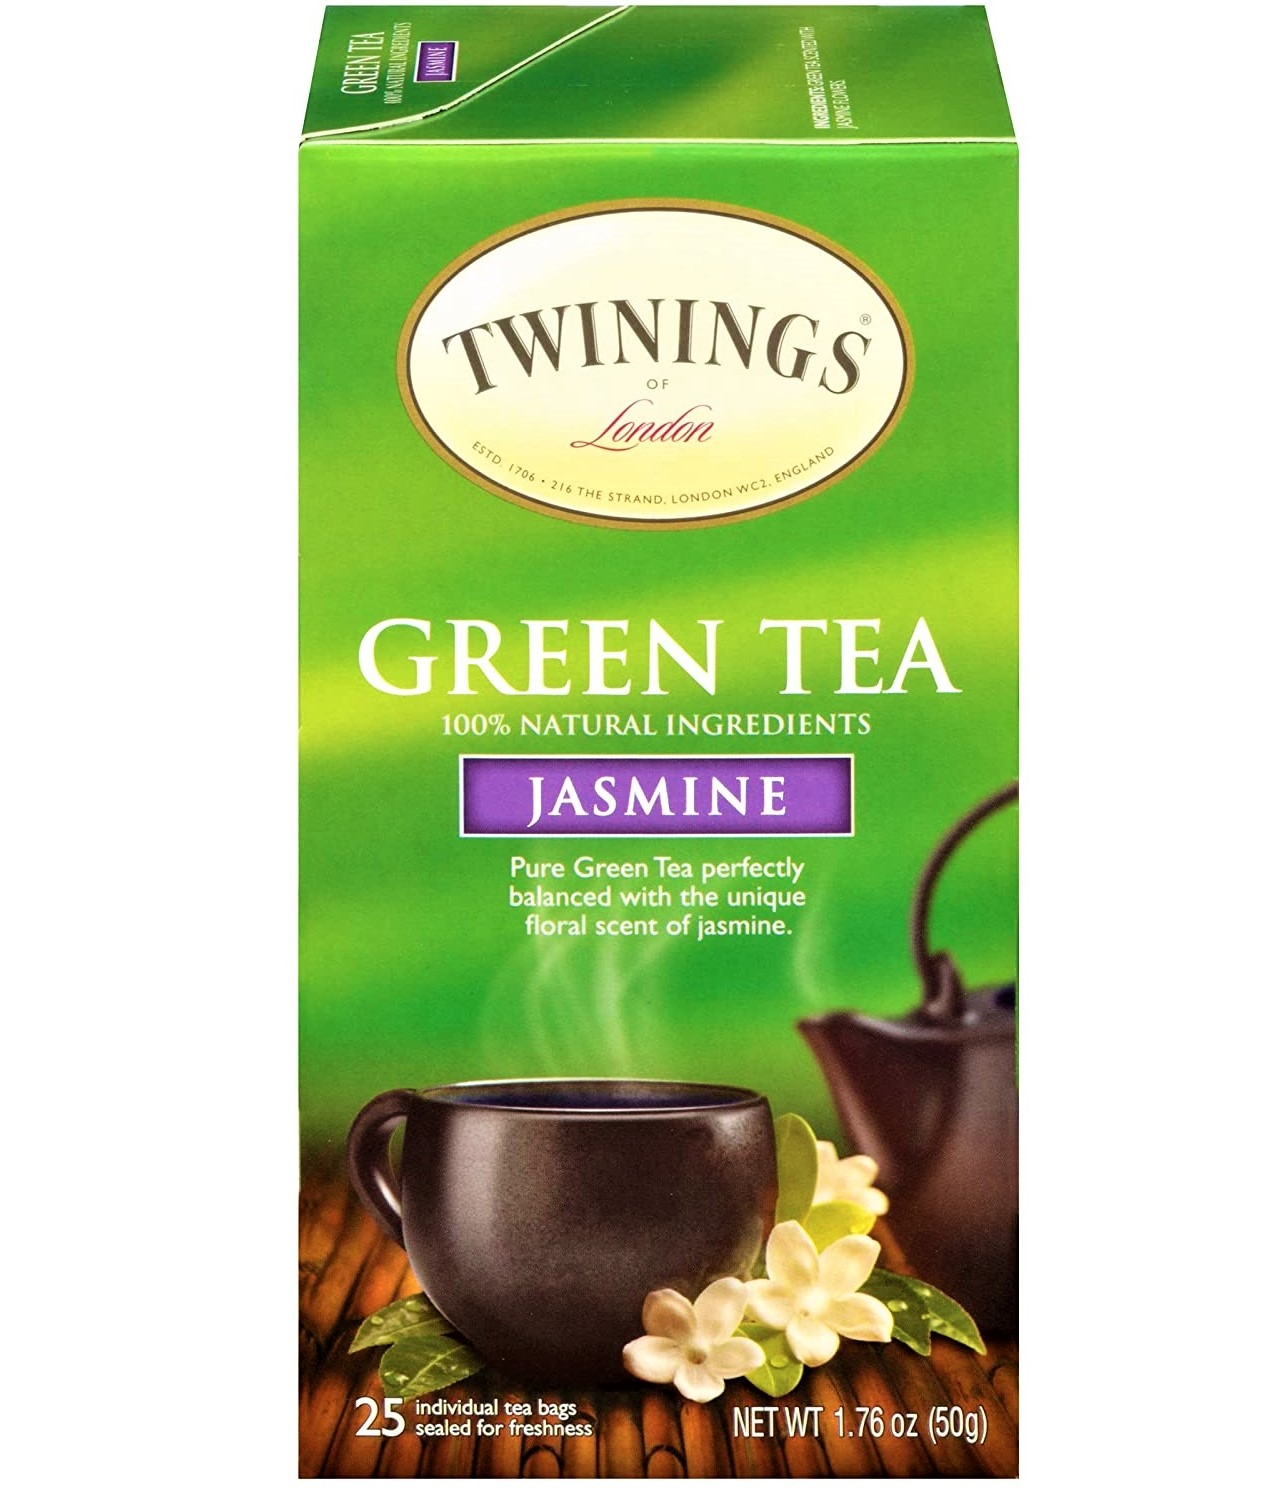 10 Best Green Tea Brand for Weight Loss – Natural Fat Reduction in 2021